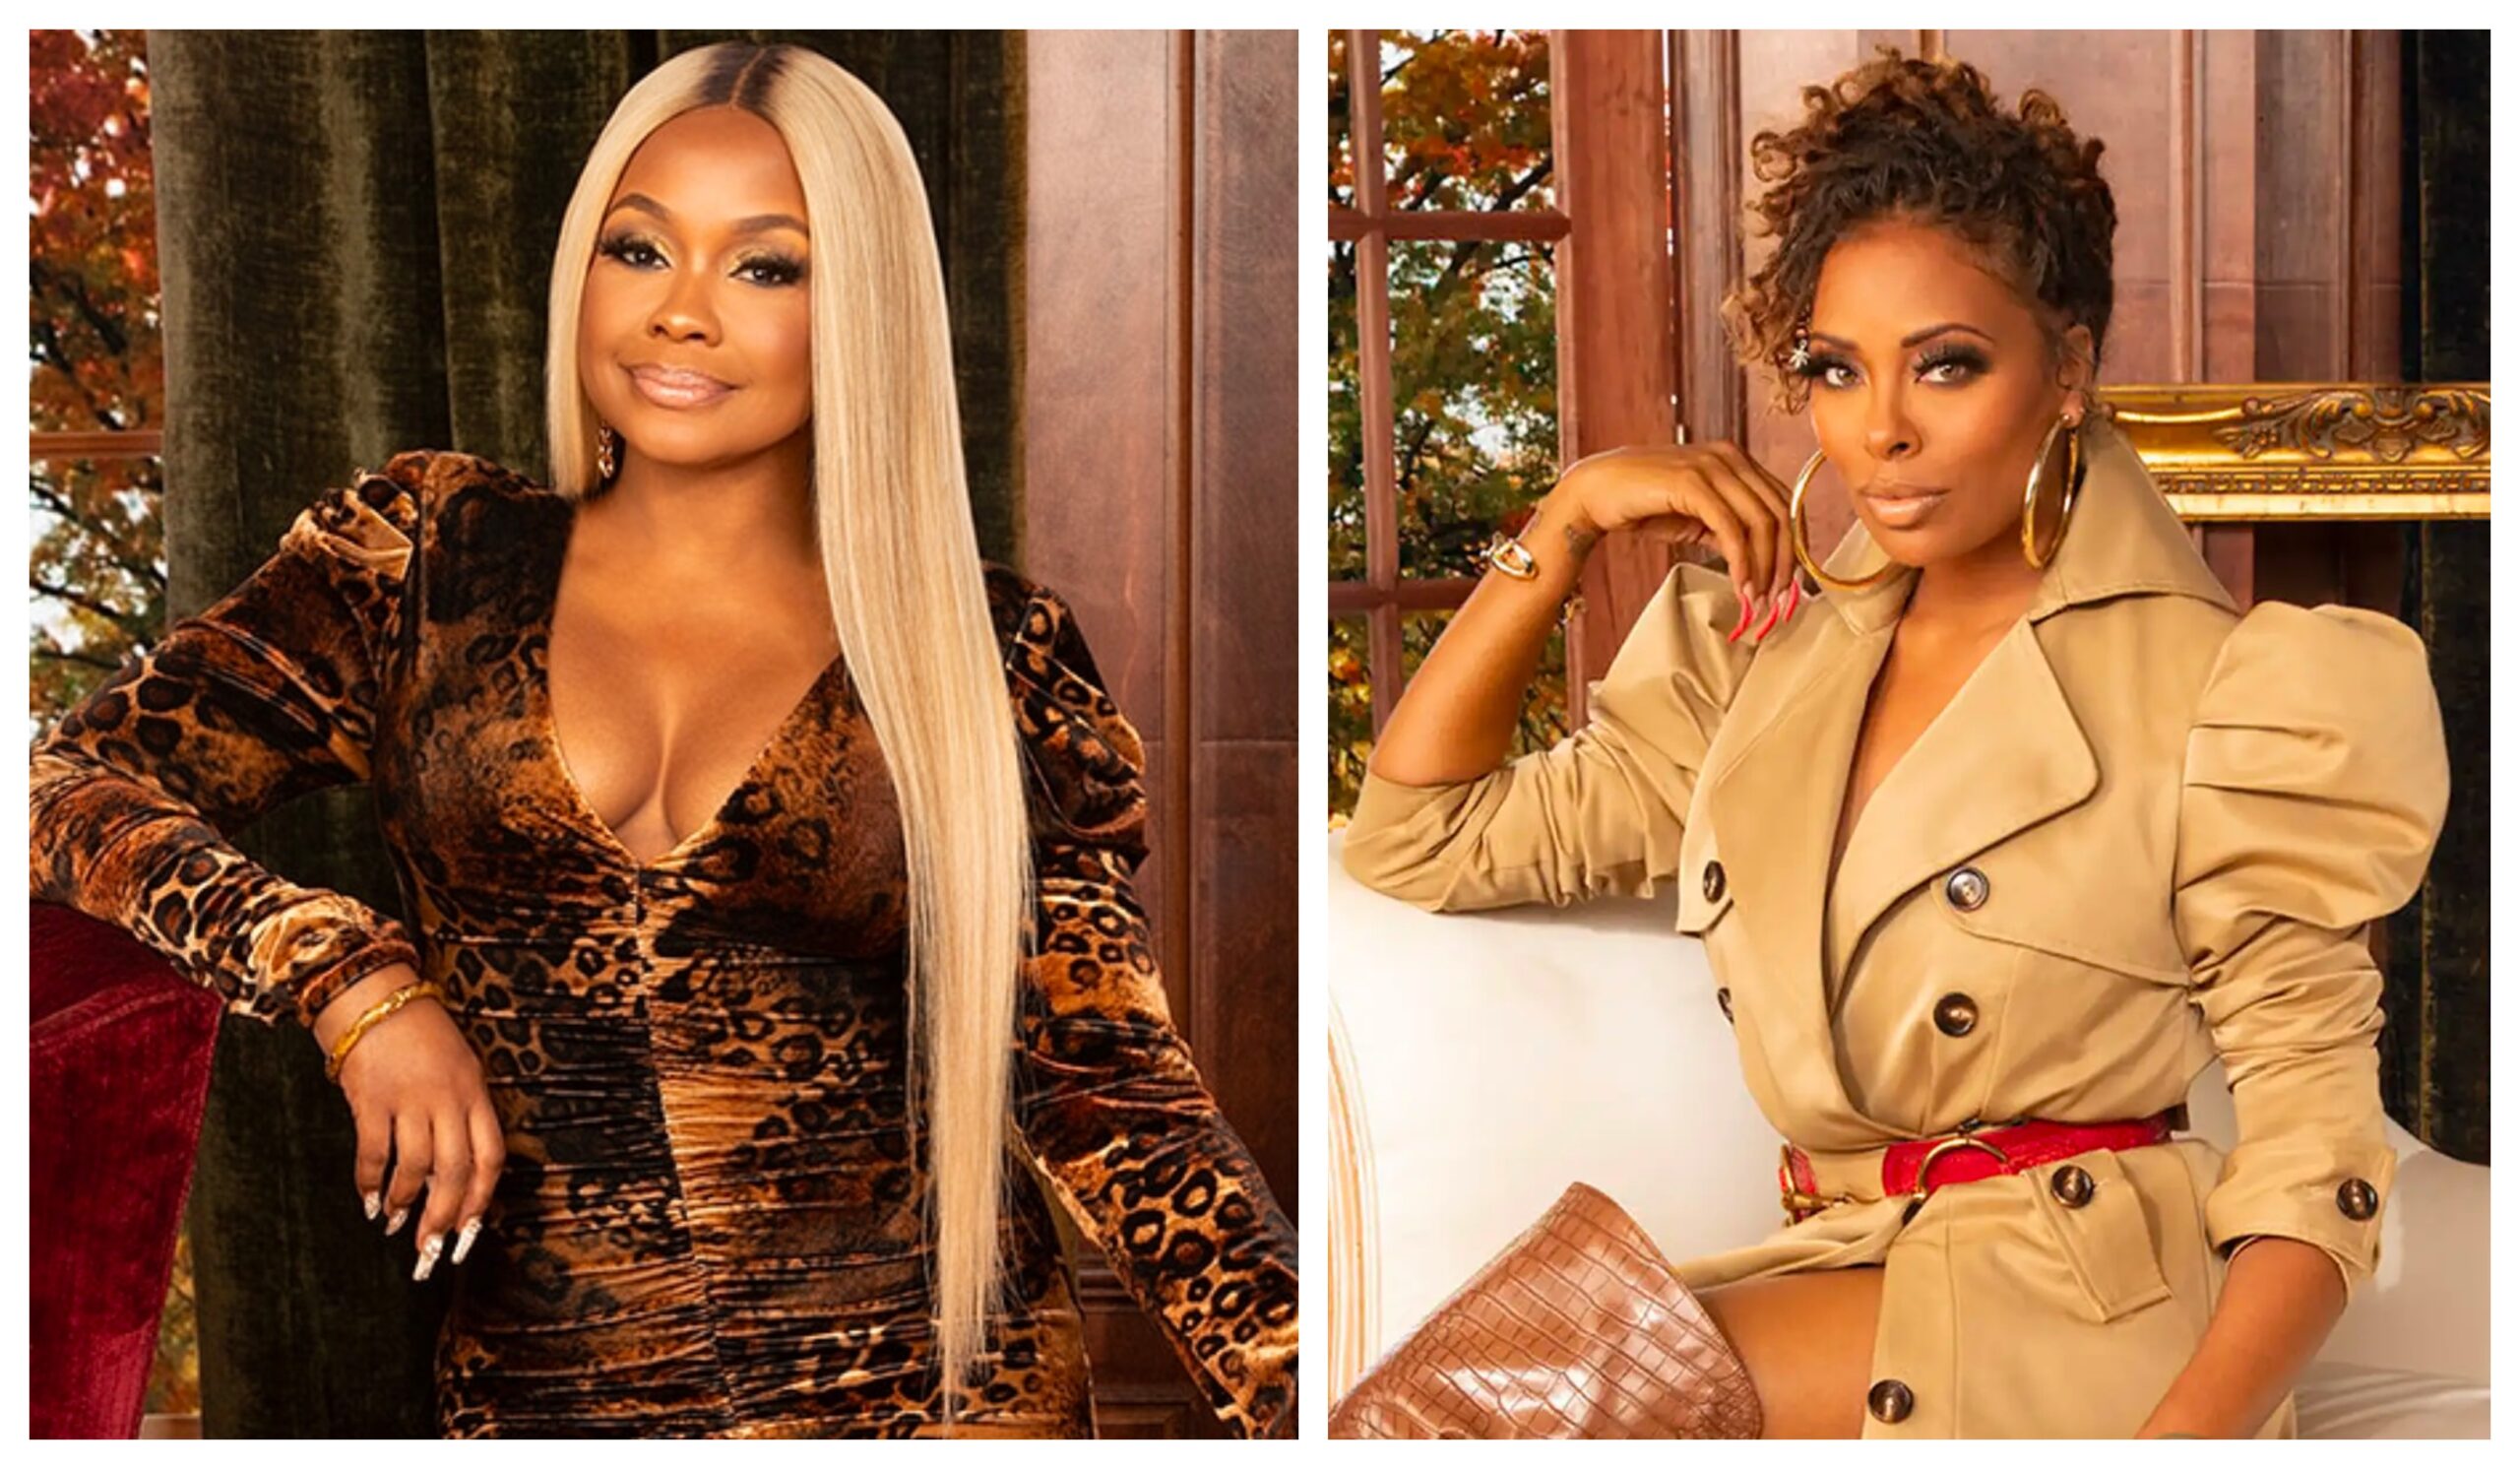 Real Housewives Ultimate Girls Trip Season 4 Announced, Phaedra Parks and Eva Marcille Return